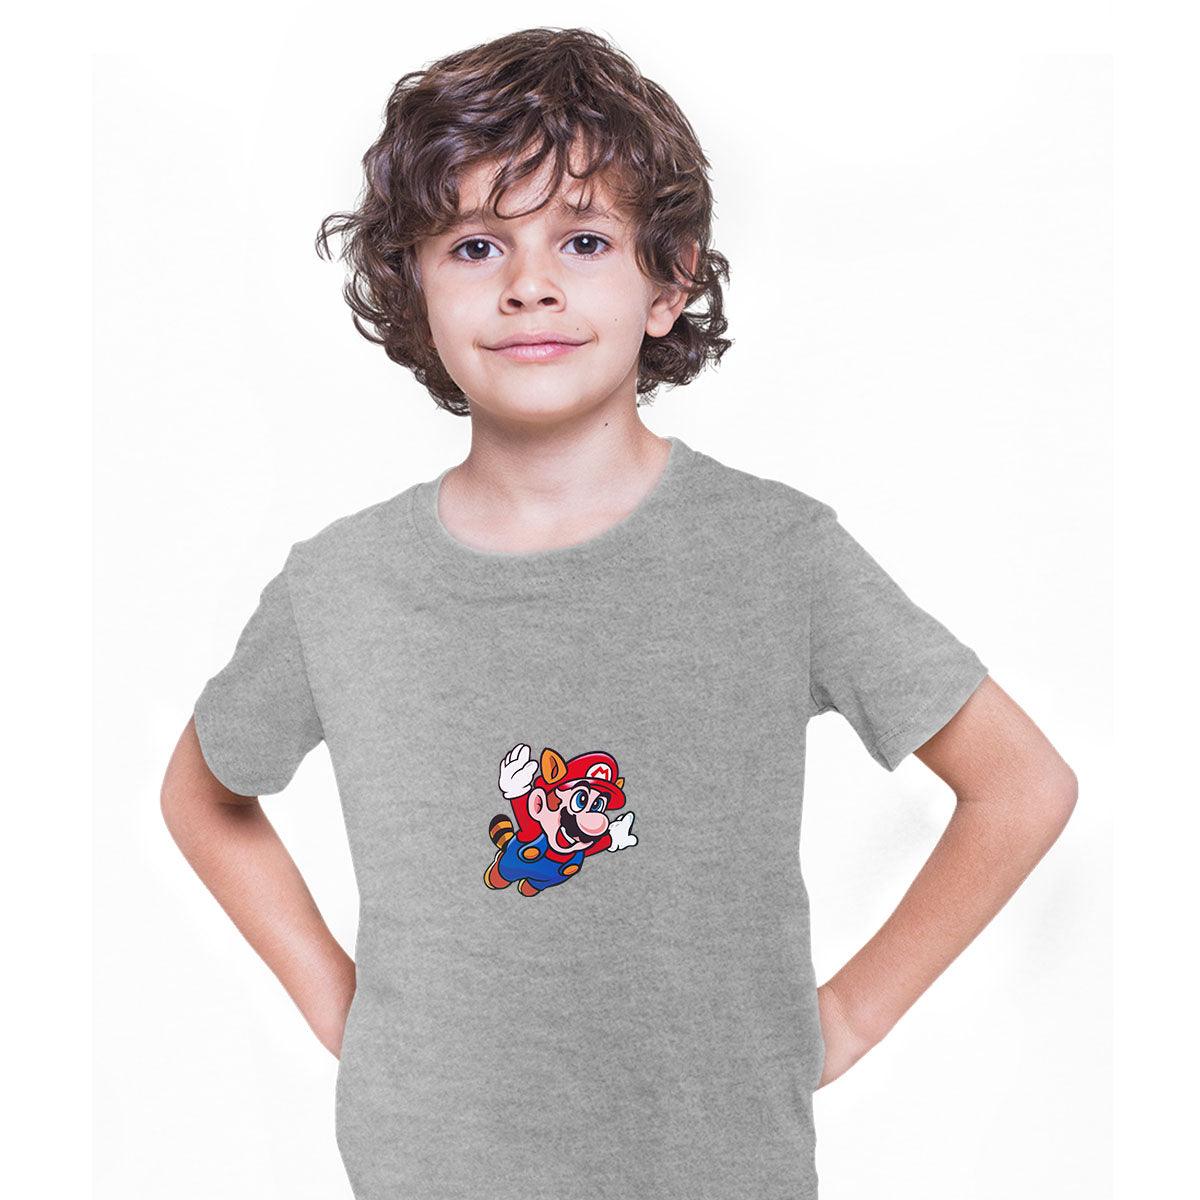 Flying Mario Bross Nintendo Mens Retro T-Shirts for Kids OLD SKOOL Game Fast Delivery - Kuzi Tees